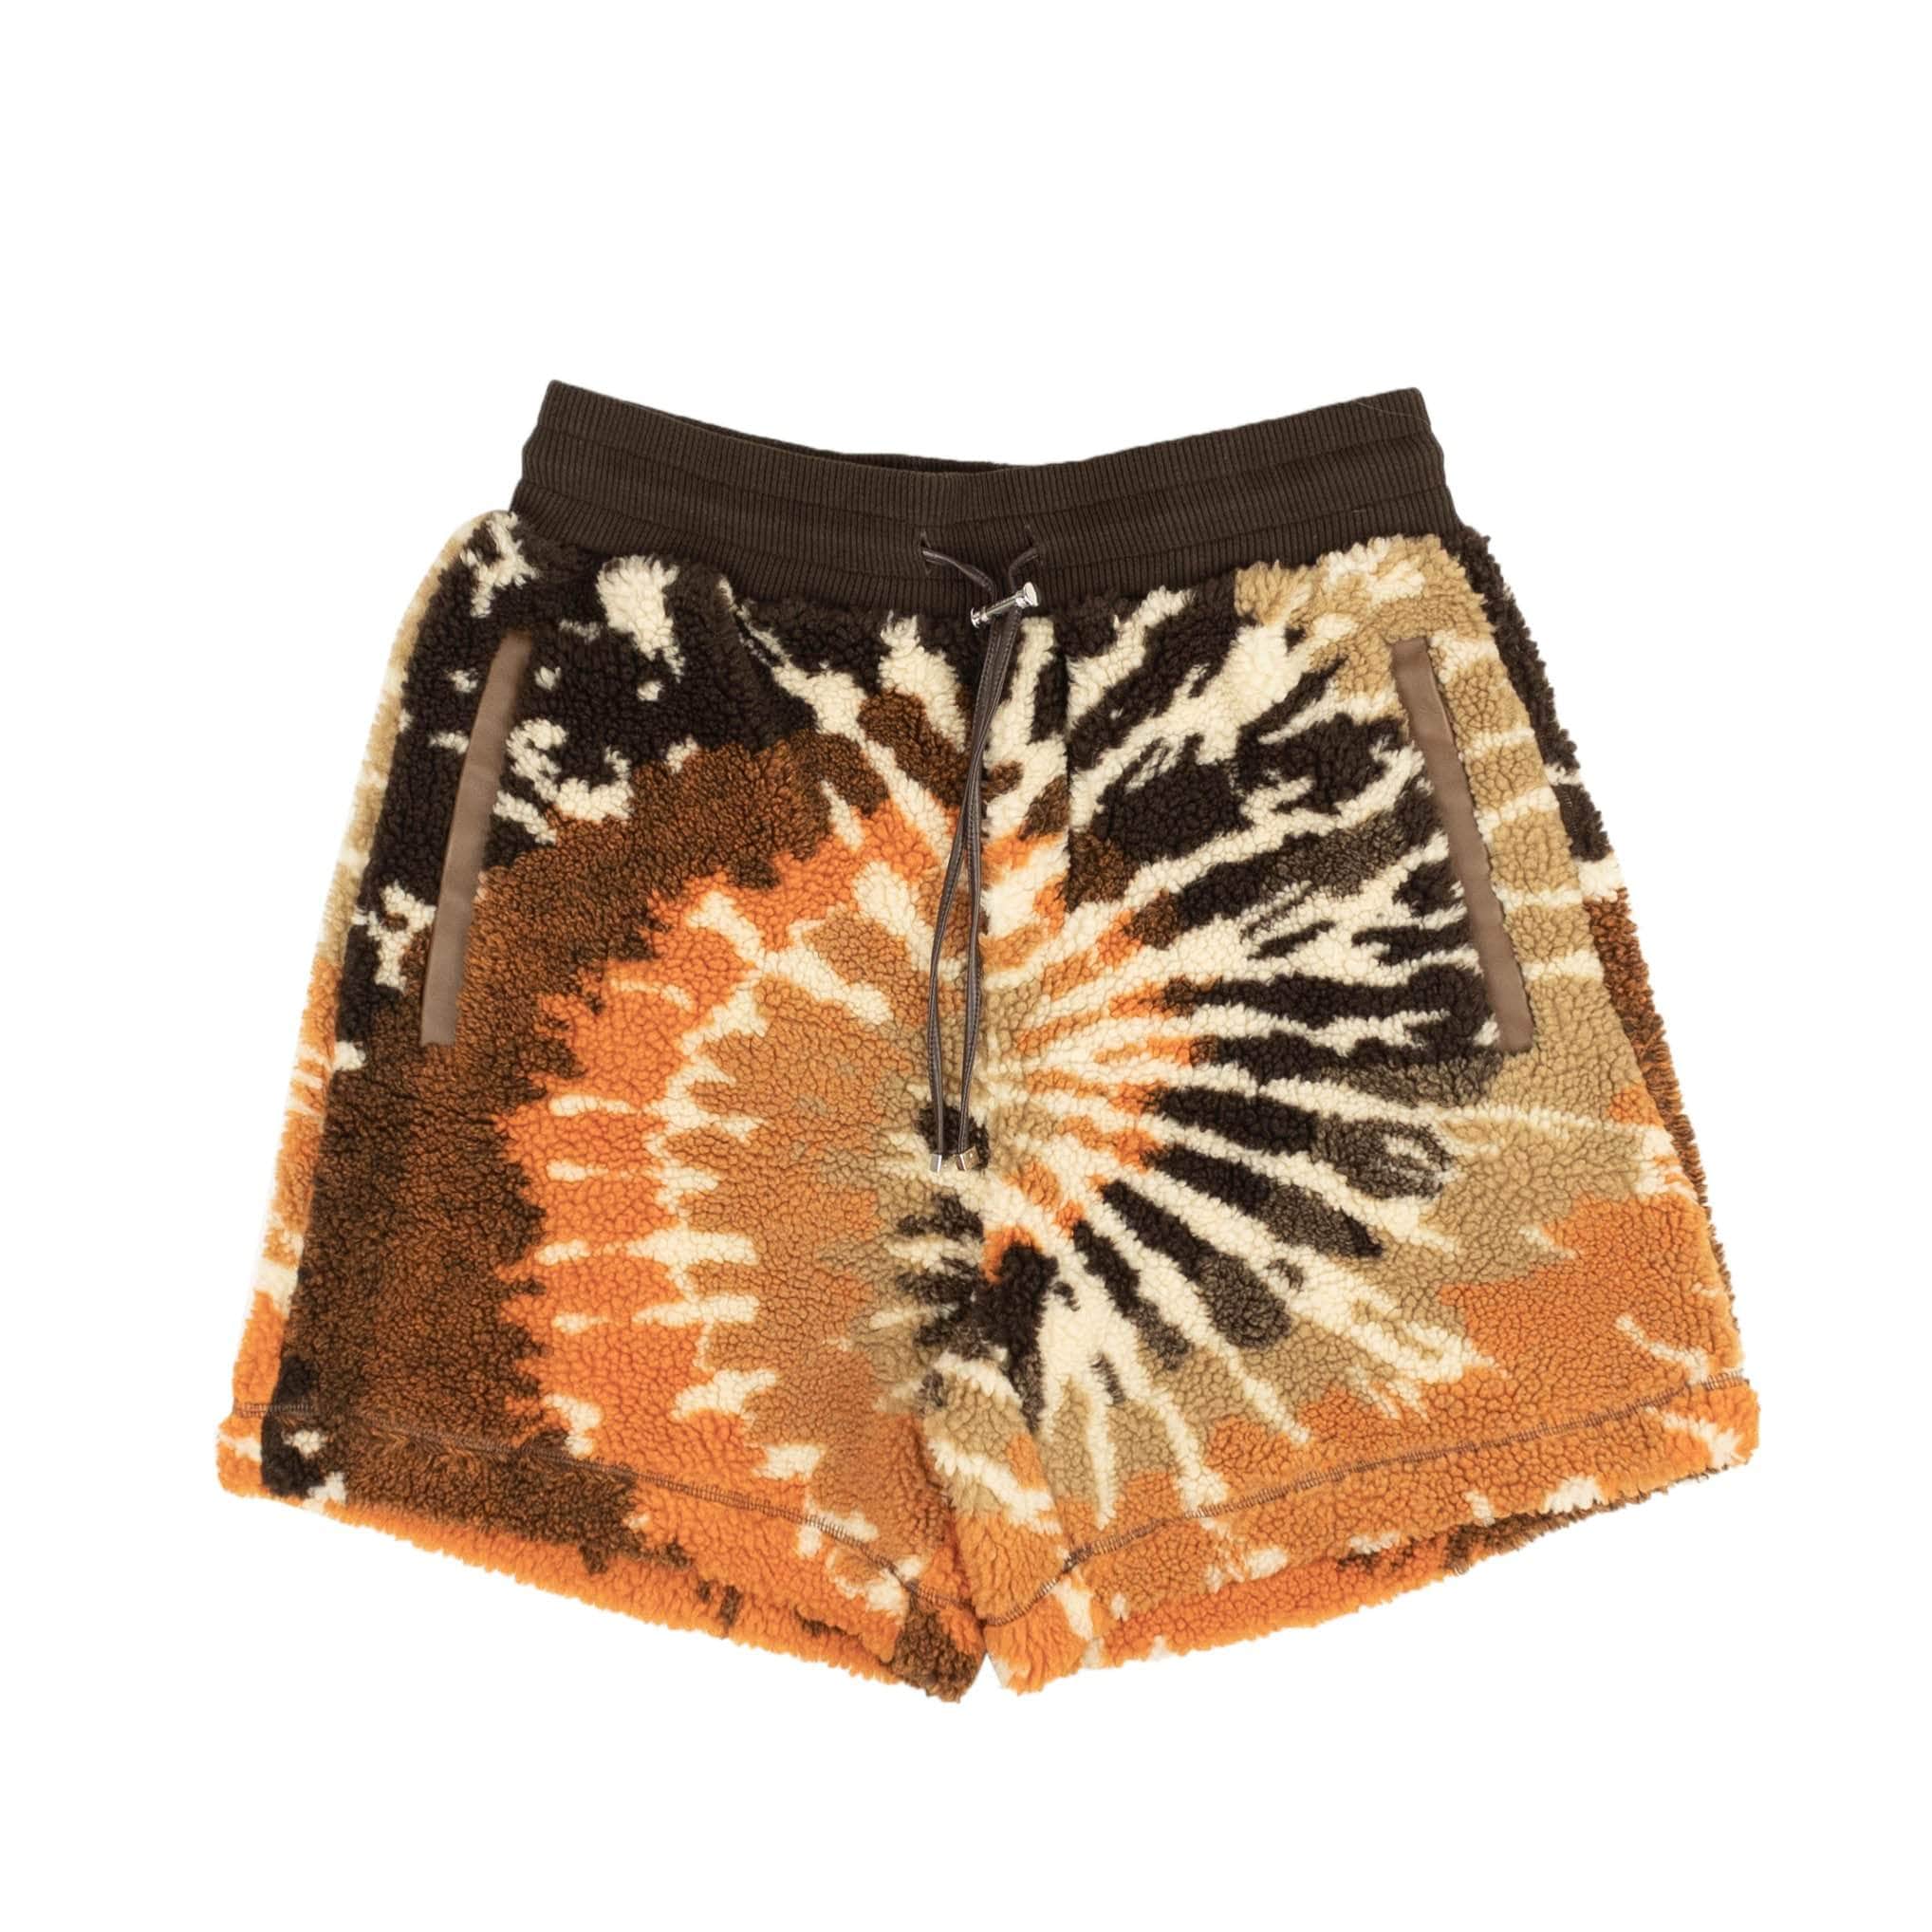 Amiri 750-1000, amc1, amiri, channelenable-all, chicmi, couponcollection, gender-mens, main-clothing, mens-shoes, MixedApparel, size-l, size-m, size-xl, SPO M Orange And Brown Tie Dye Polar Fleece Shorts 95-AMR-1194/M 95-AMR-1194/M